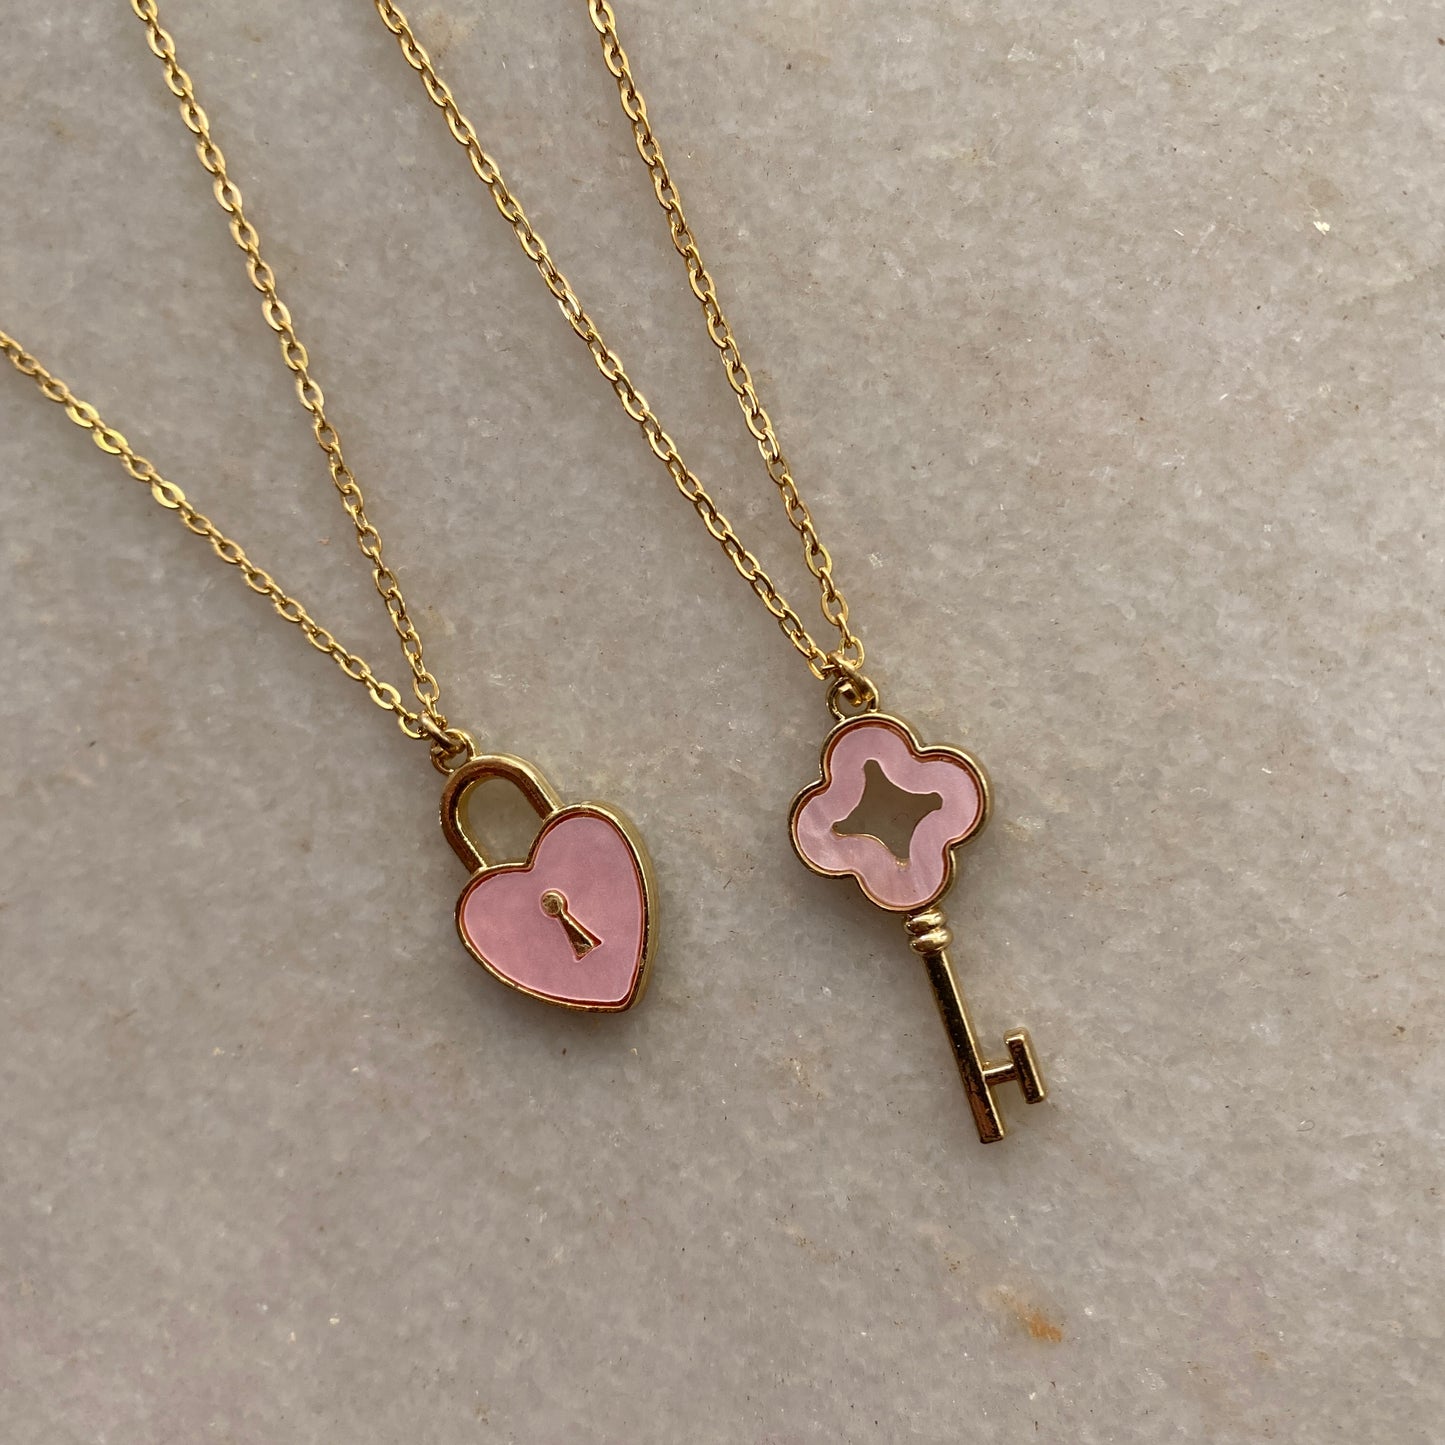 BEST FRIENDS LOCK AND KEY COMBO NECKLACES